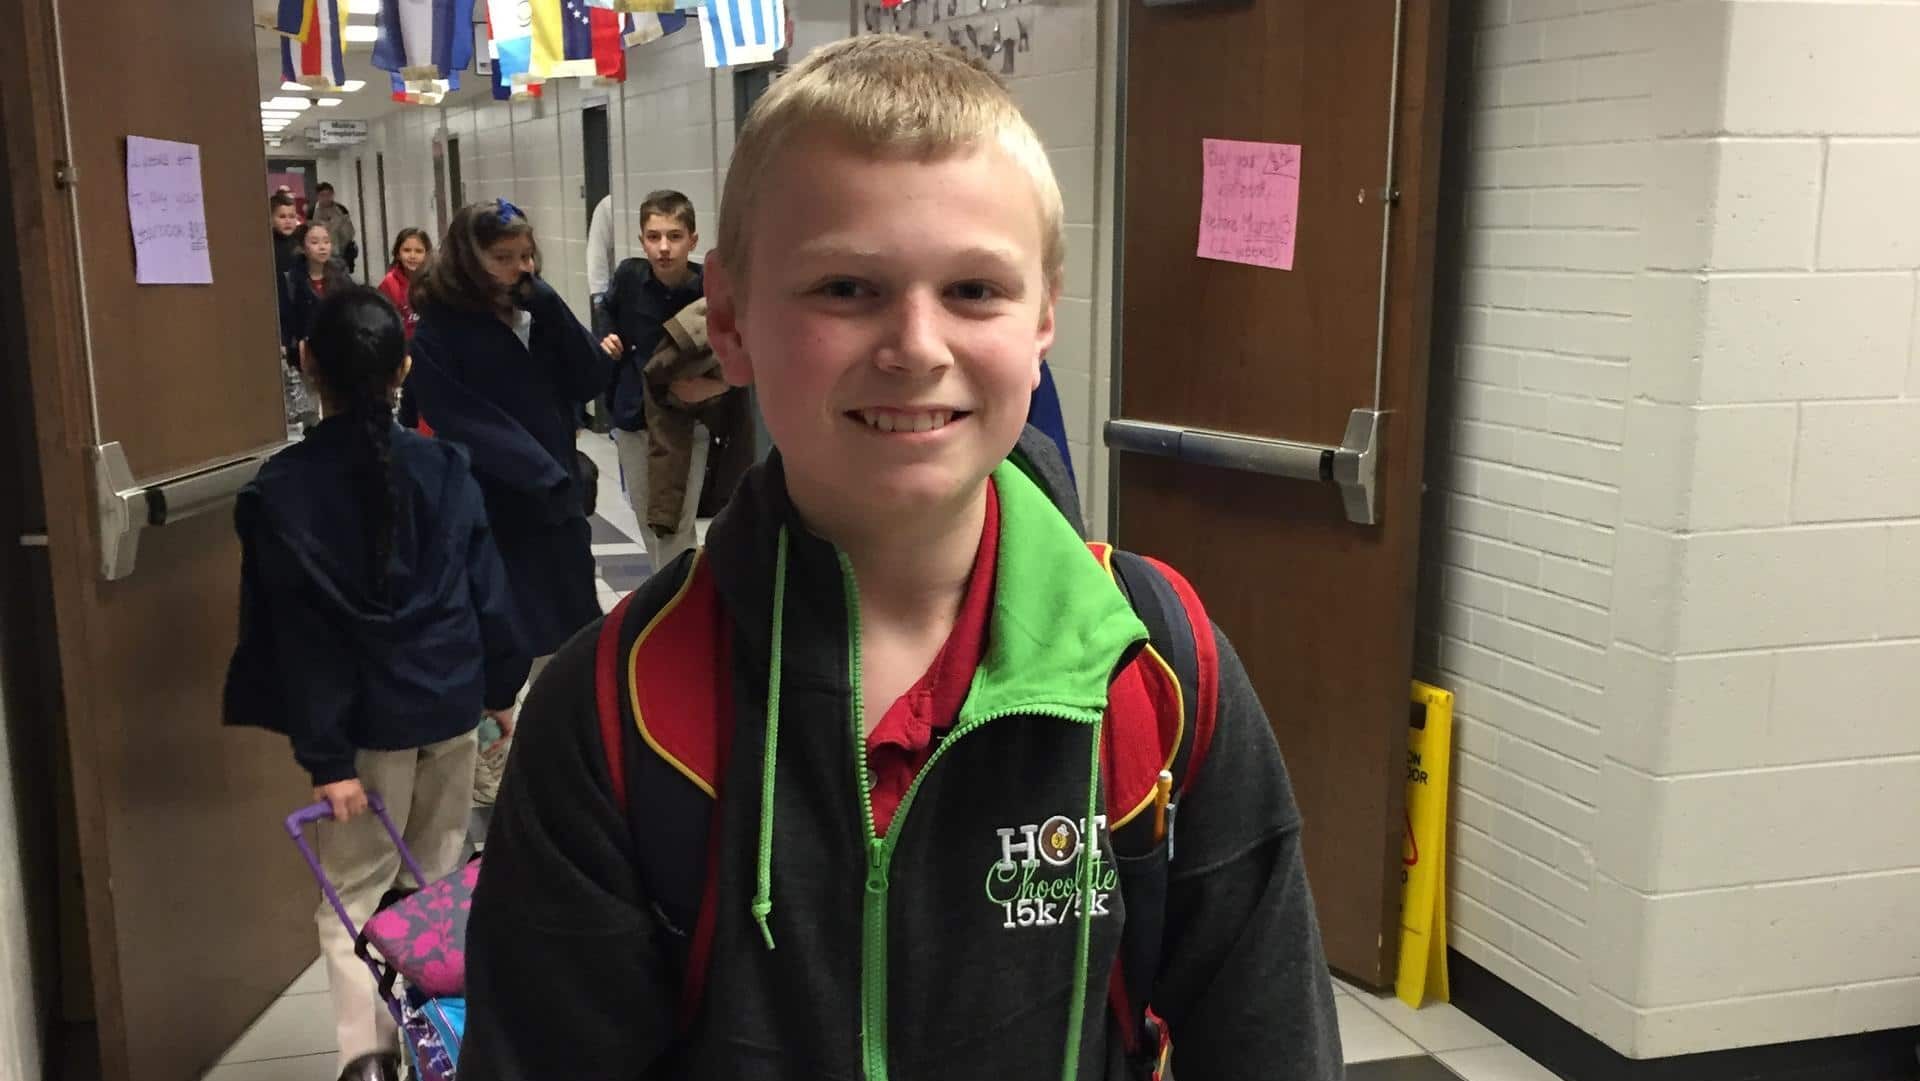 Skyler is in the eighth grade at World Language Academy. He hopes his knowledge of Spanish will help him get better jobs. He also dreams in Spanish. For more on him or WLA, see Part Two of this series.